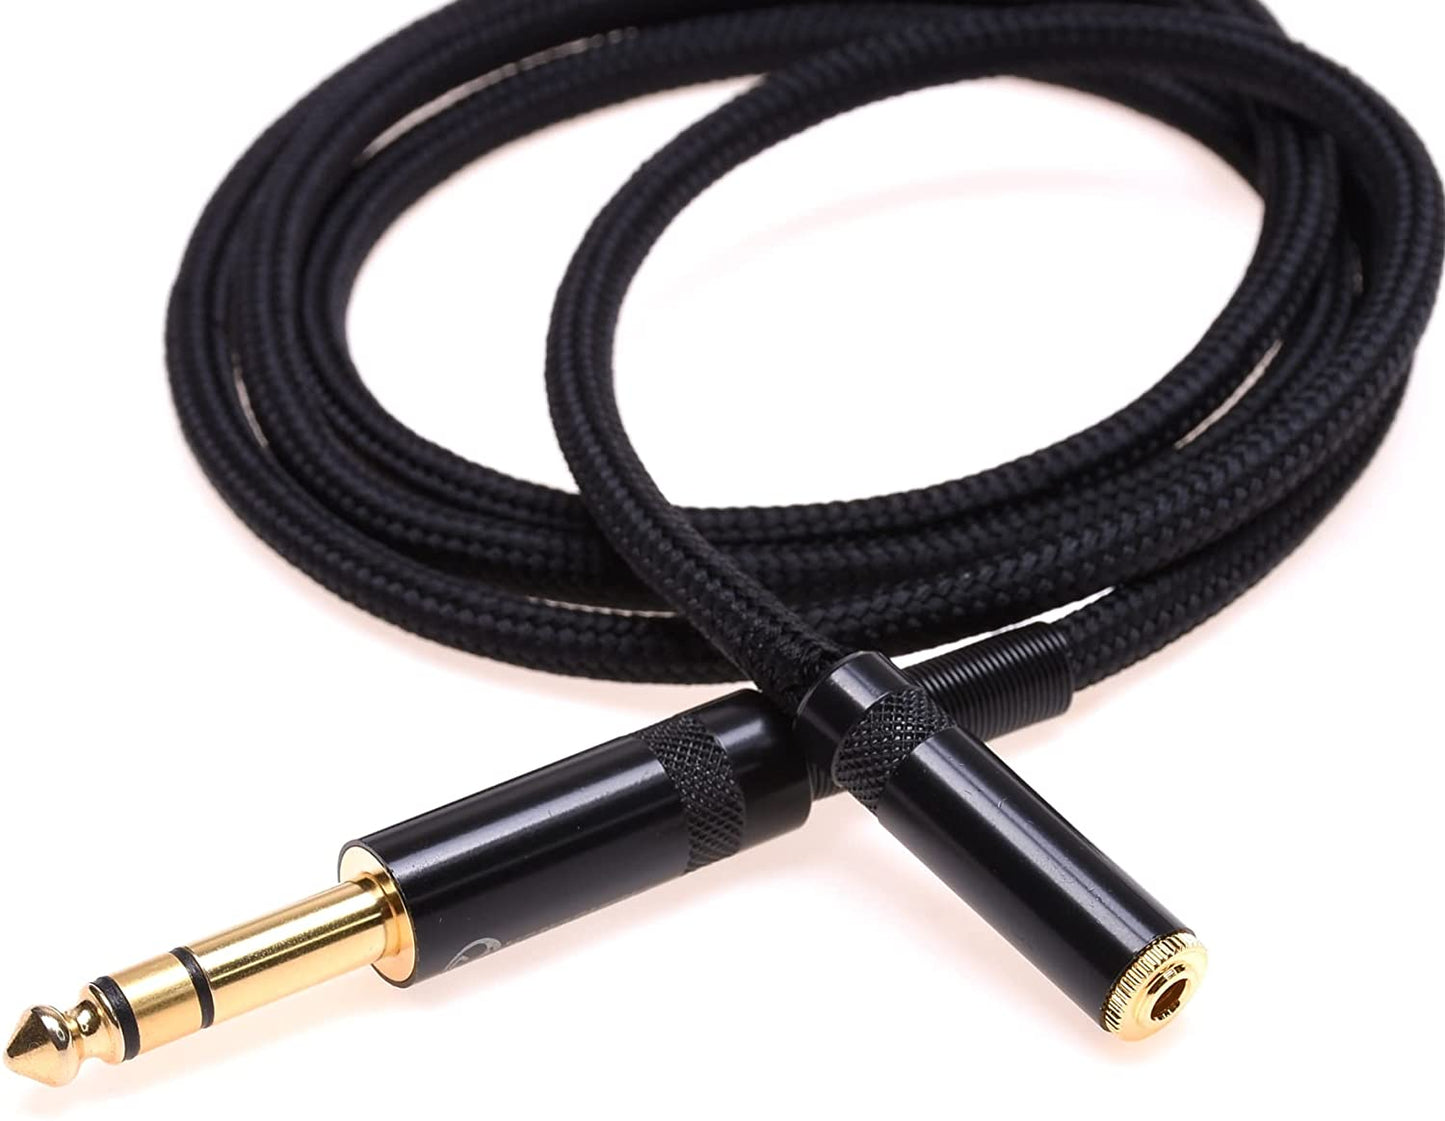 1/4 6.35mm Male to 3.5mm Female Headphone Extension Cable 8Cores Silver Plated HiFi Cable Audio Adapter